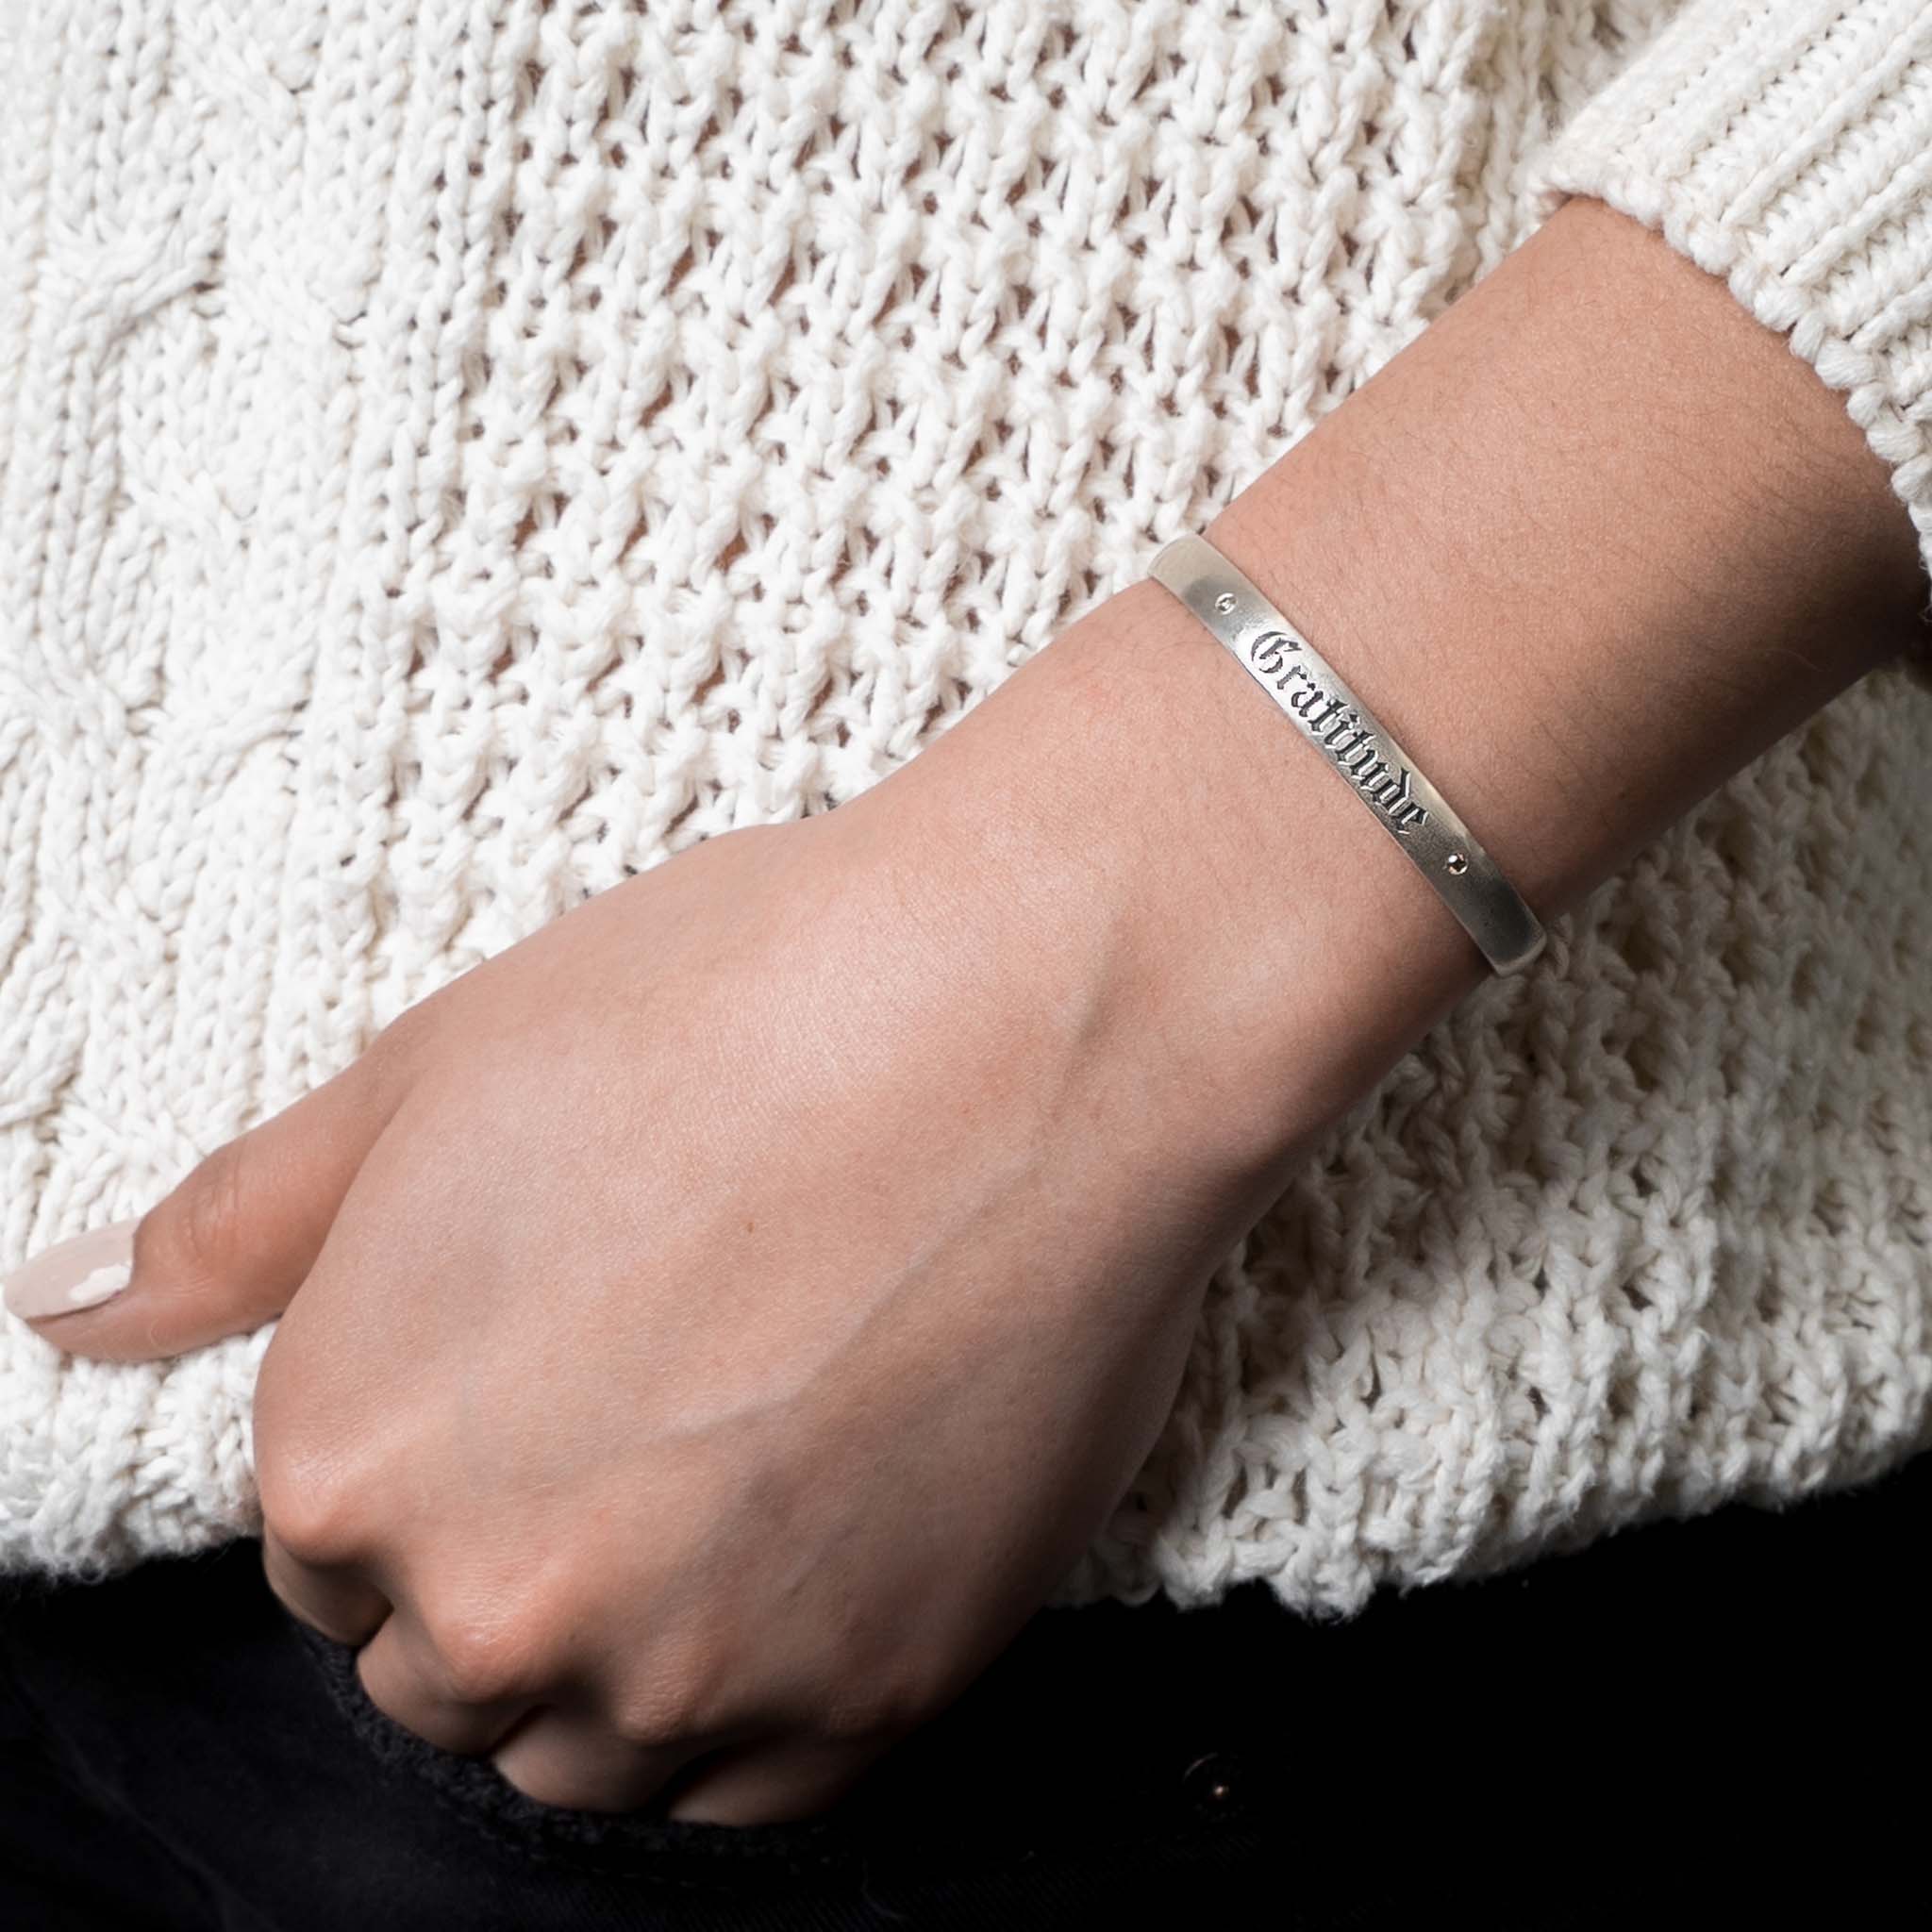 Sterling silver cuff with "Gratitude" engraved on it pictured on a woman's wrist